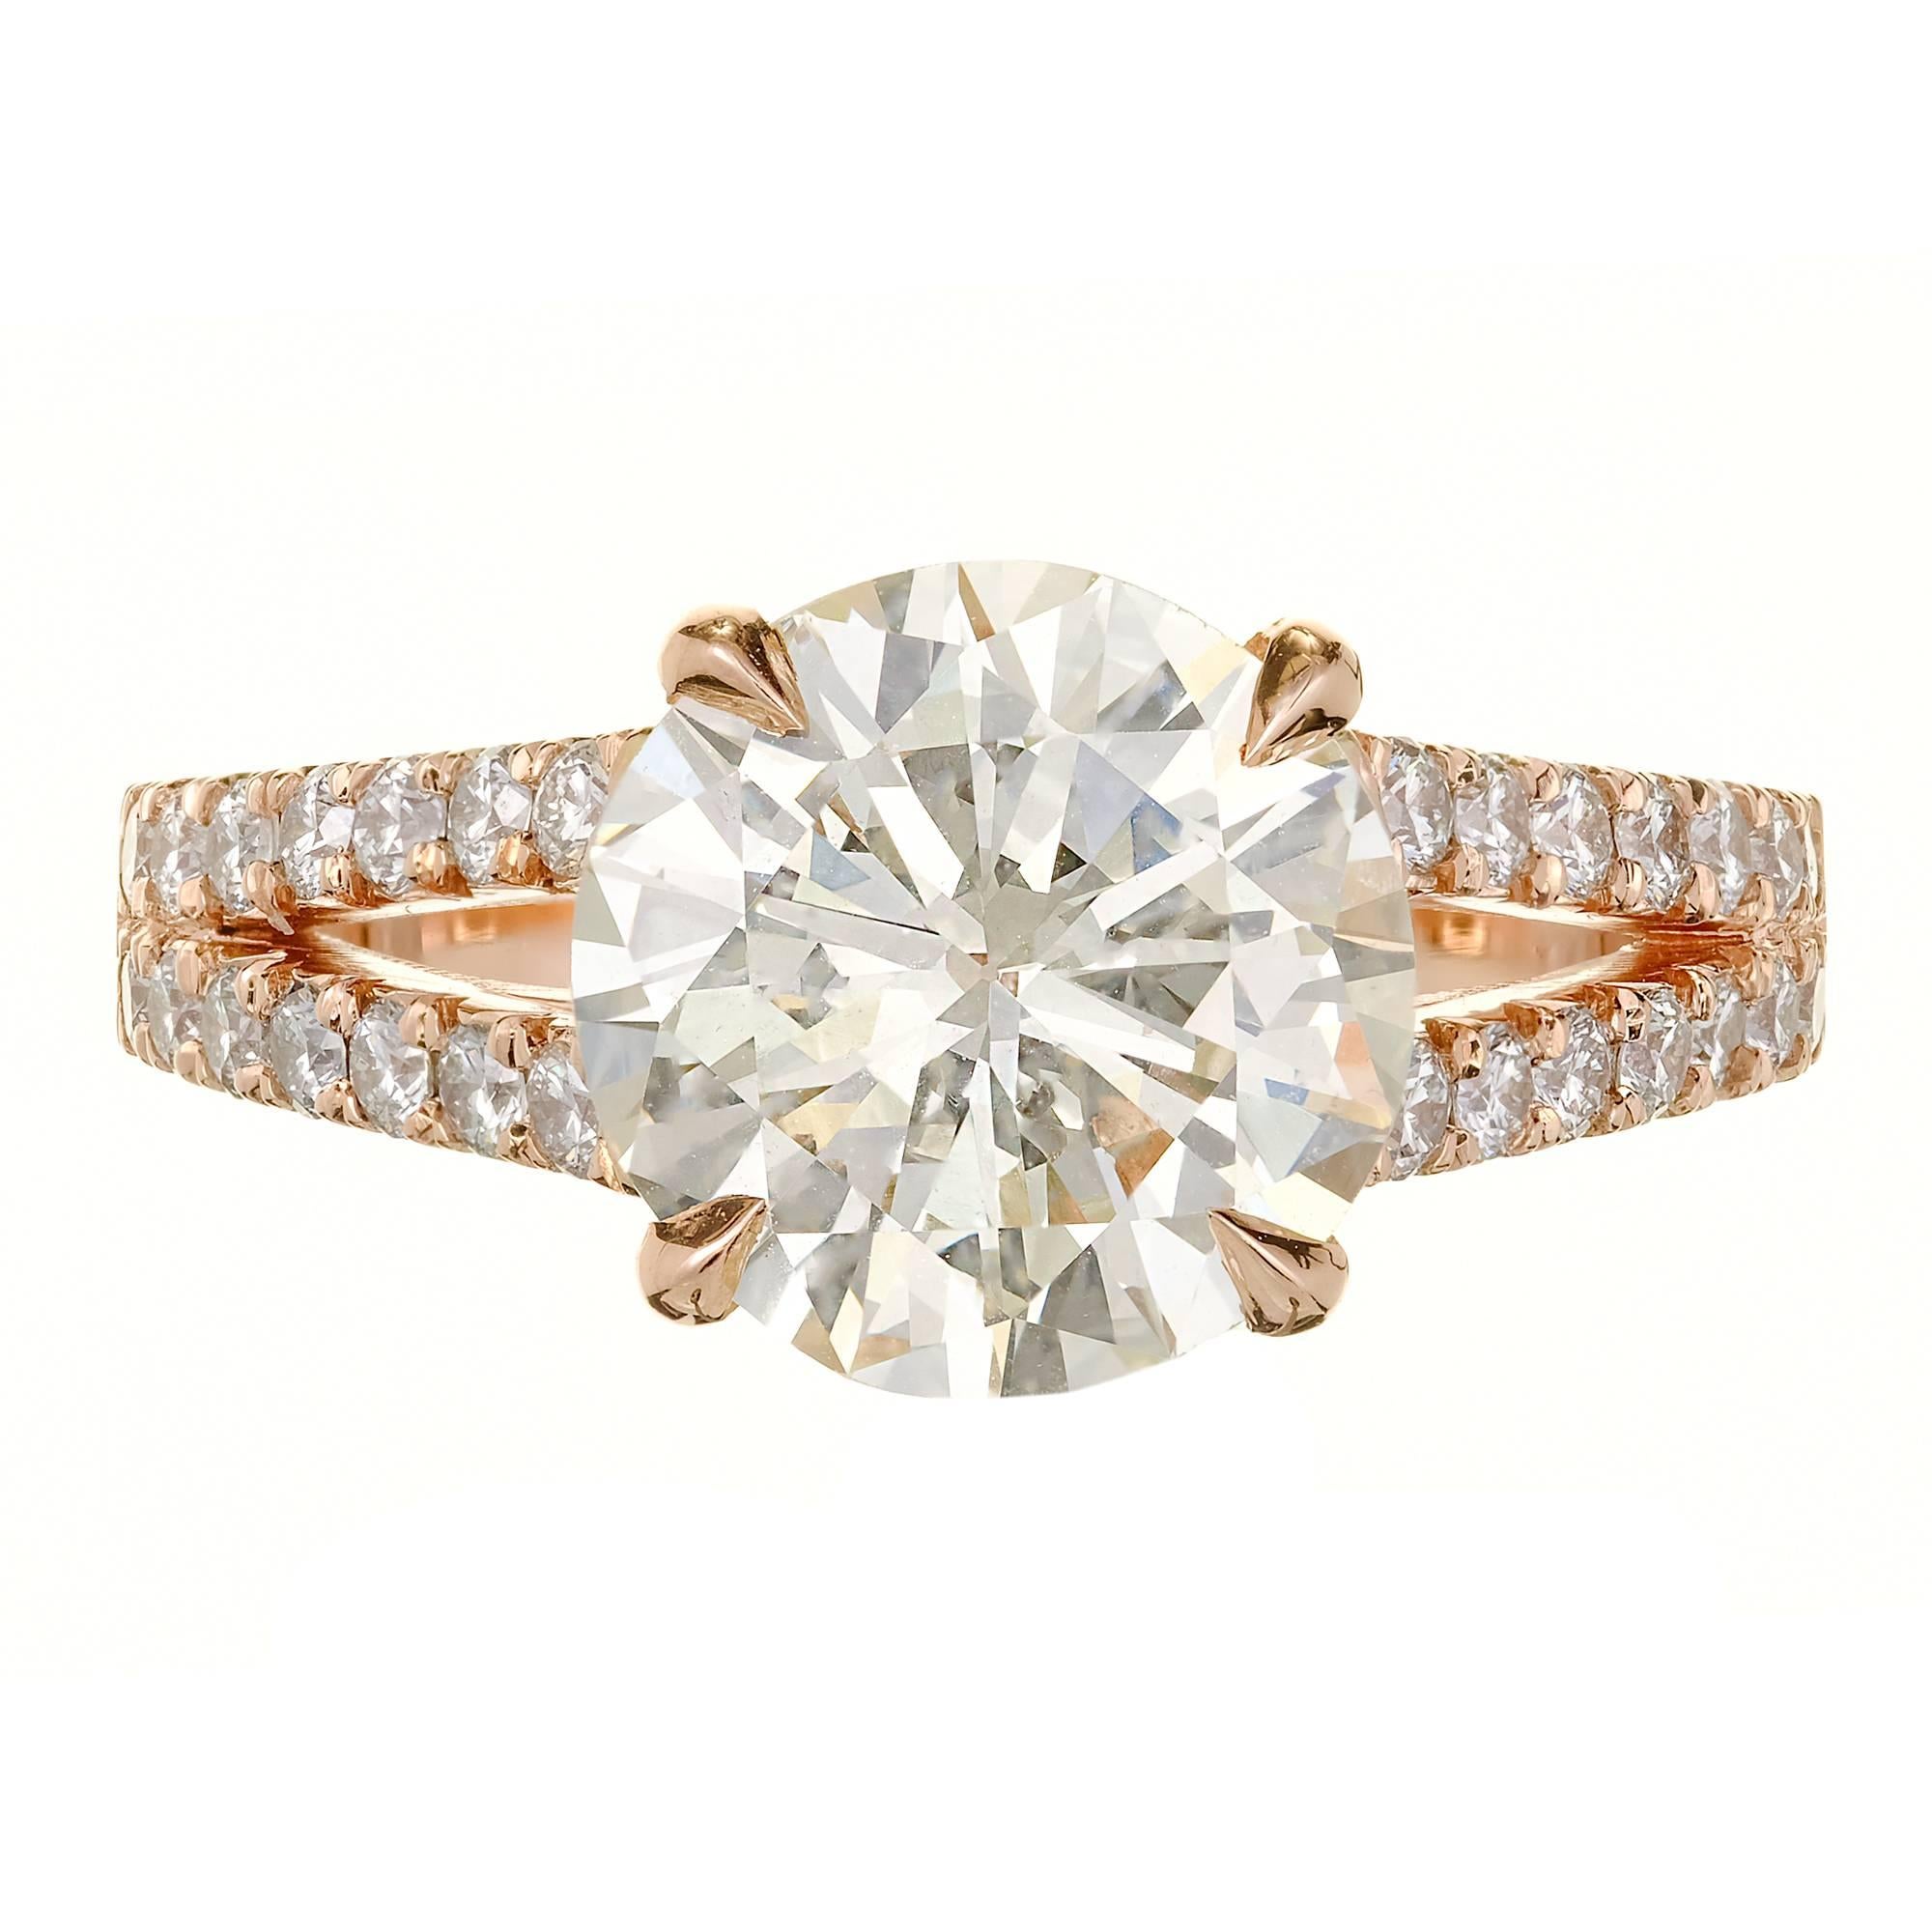 Peter Suchy custom design 14k gold split shank Diamond engagement ring. Designed to sit low to the finger and still allow a wedding band to sit flush to the engagement ring. The ring was designed to show off the brilliance and sparkle of this